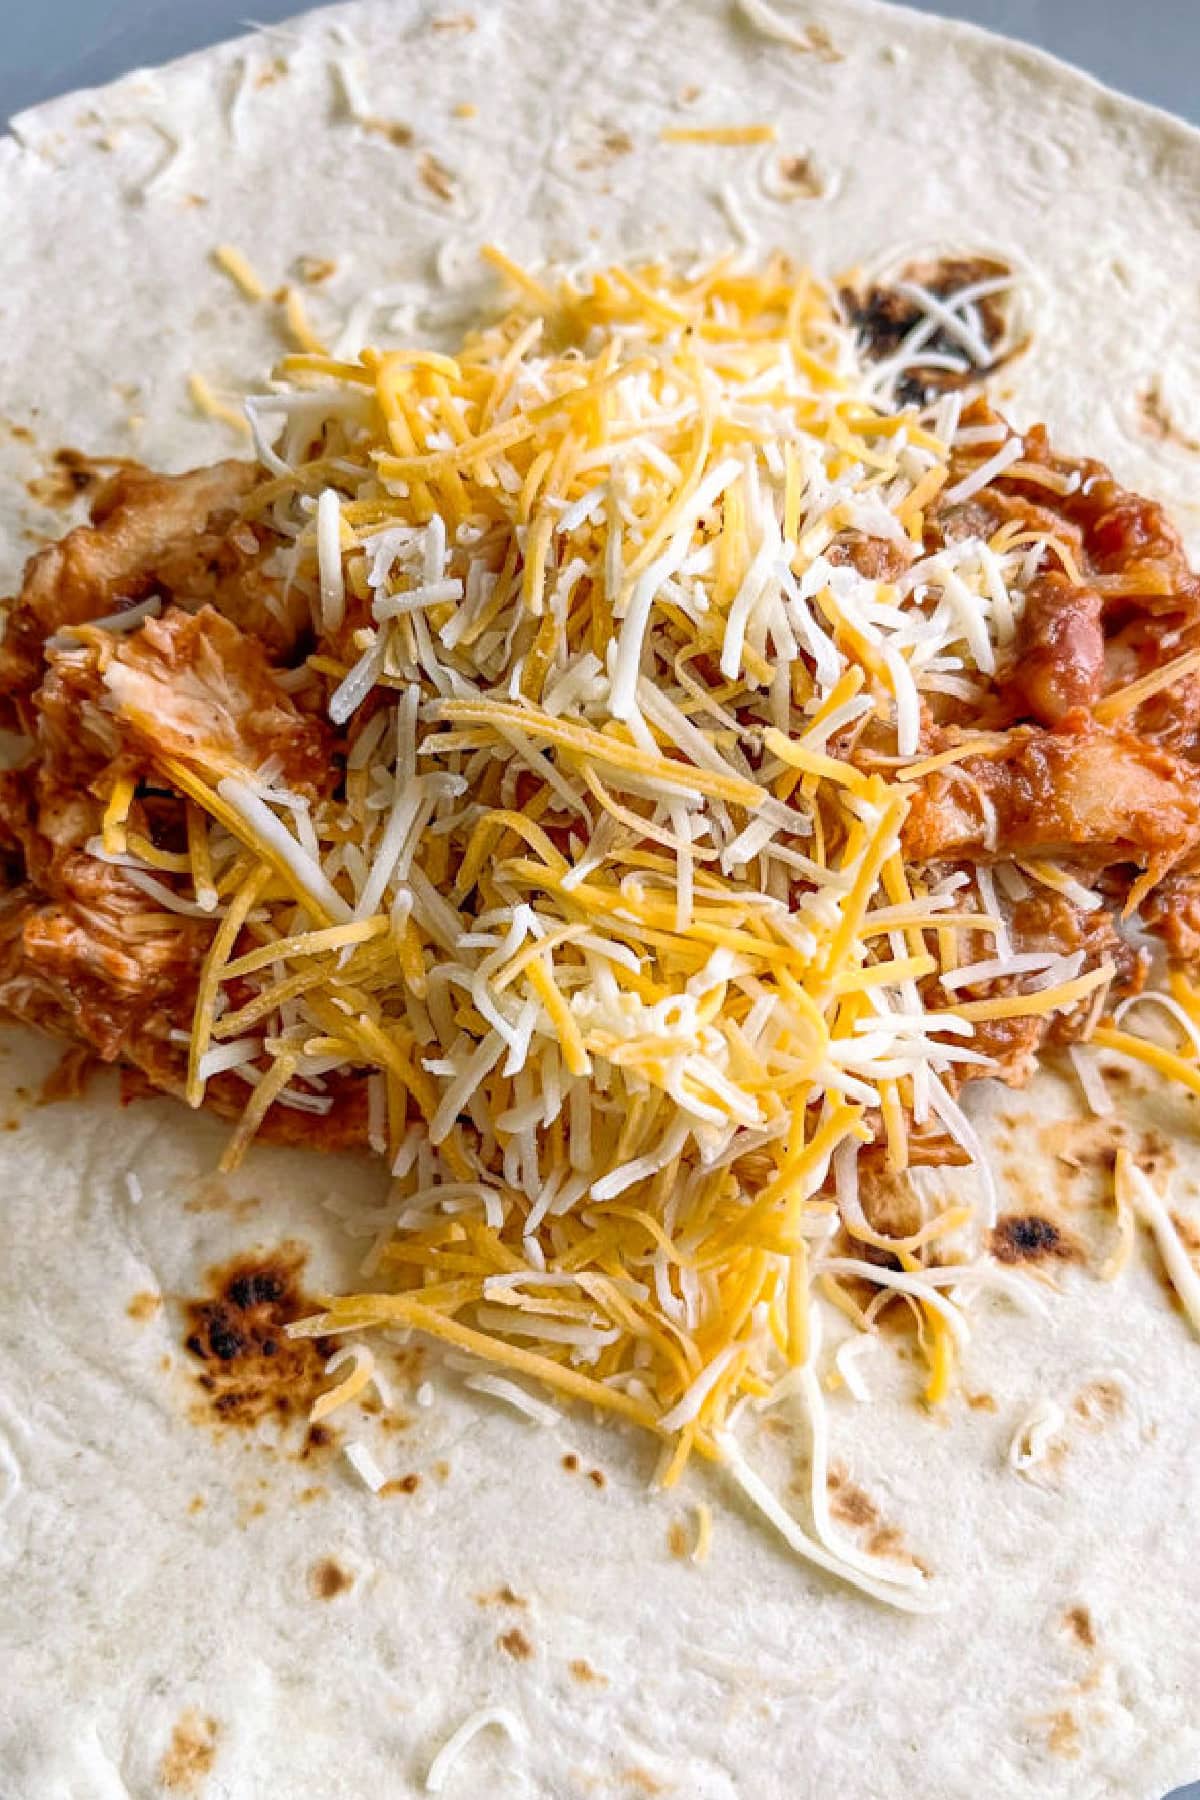 Chicken filling with cheese in a tortilla